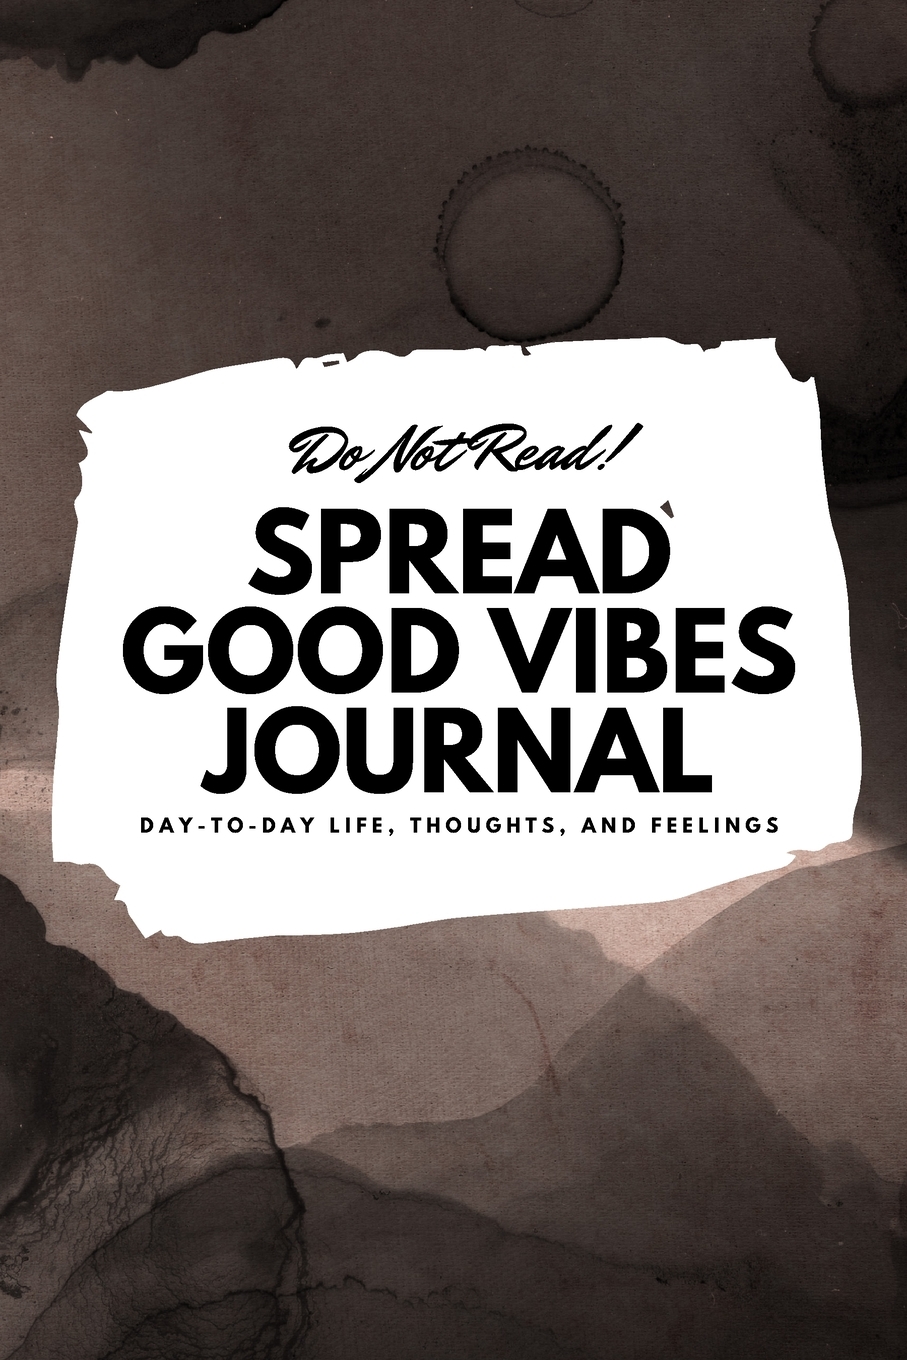 6x9 Blank Journal: Do Not Read! Spread Good Vibes Journal - Small Blank Journal - 6x9 Blank Journal (Softcover Journal / Notebook / Sketchbook / Diary) (Series #19) (Paperback) - image 1 of 1